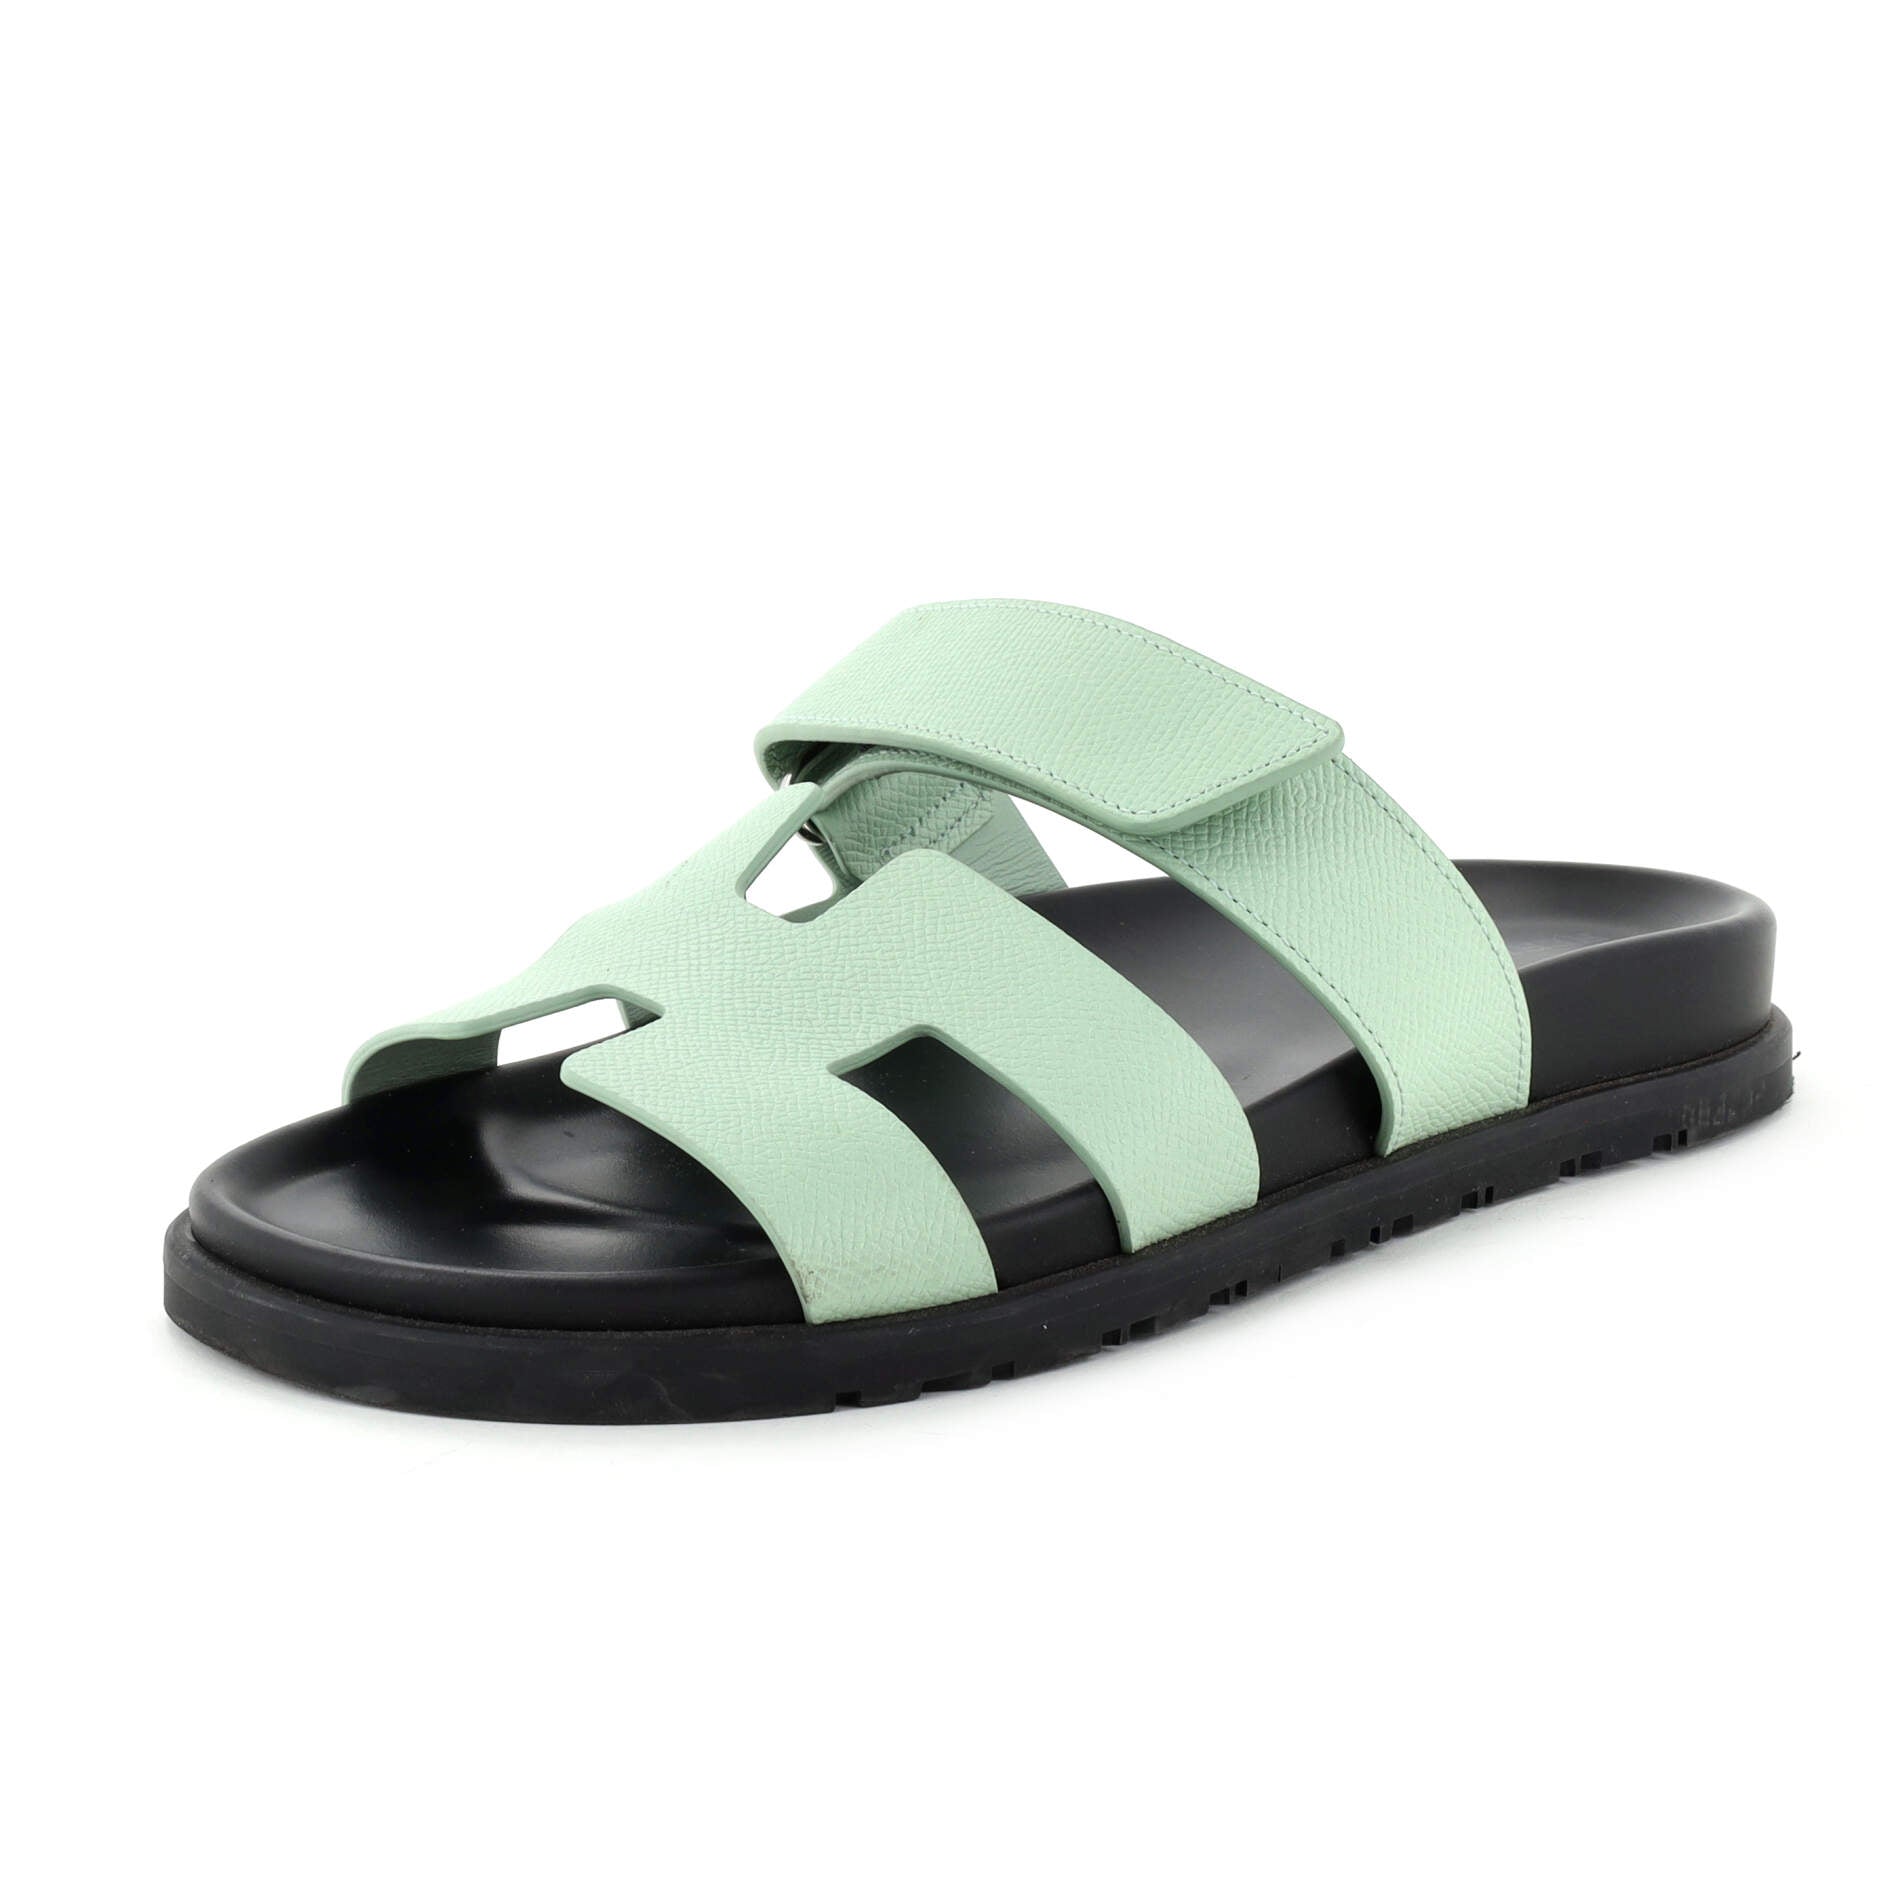 Women's Chypre Sandals Leather